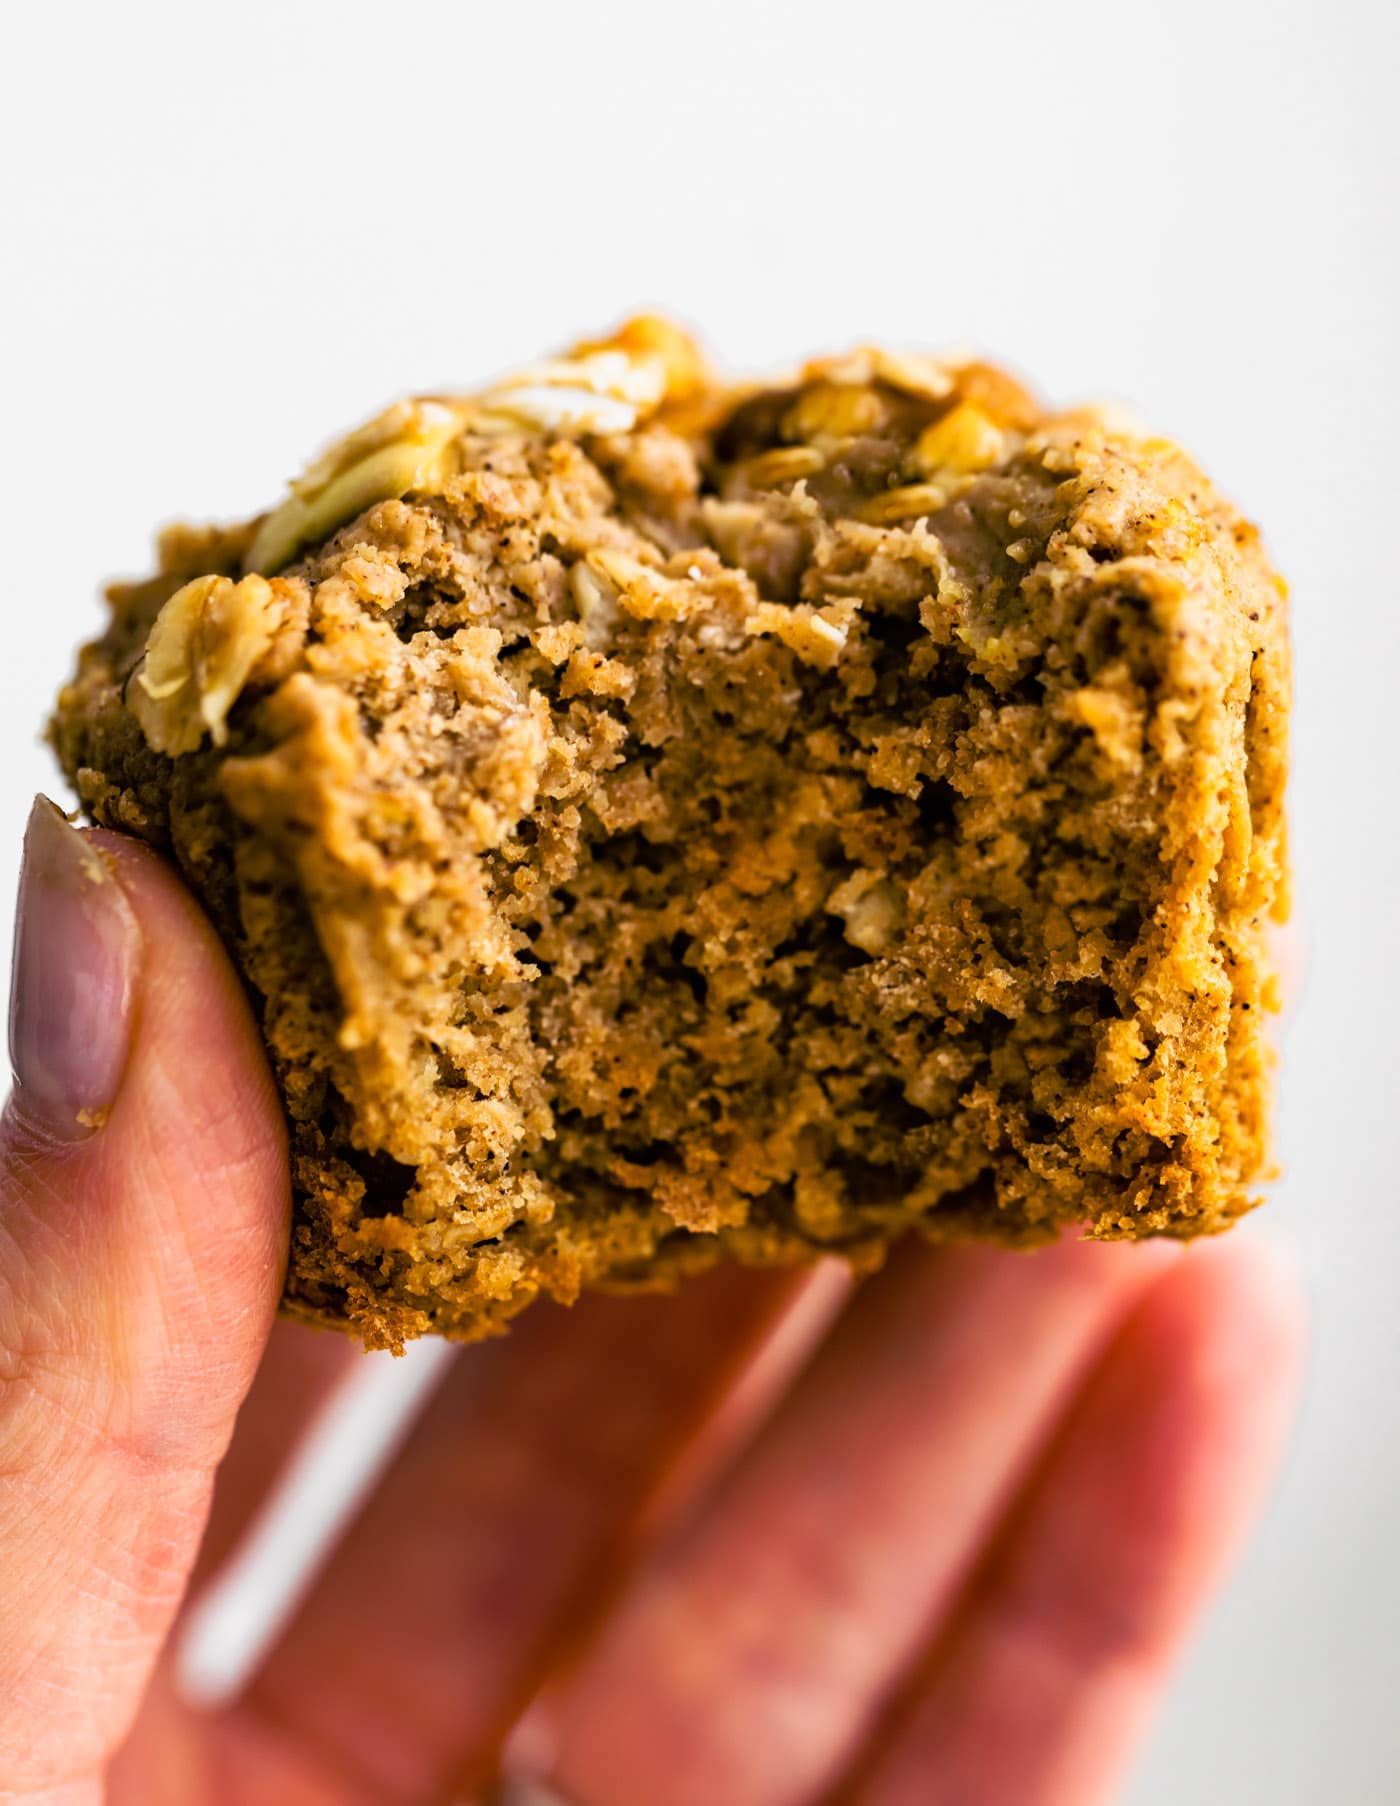 Gluten free apple oatmeal muffin being held with a bite taken out